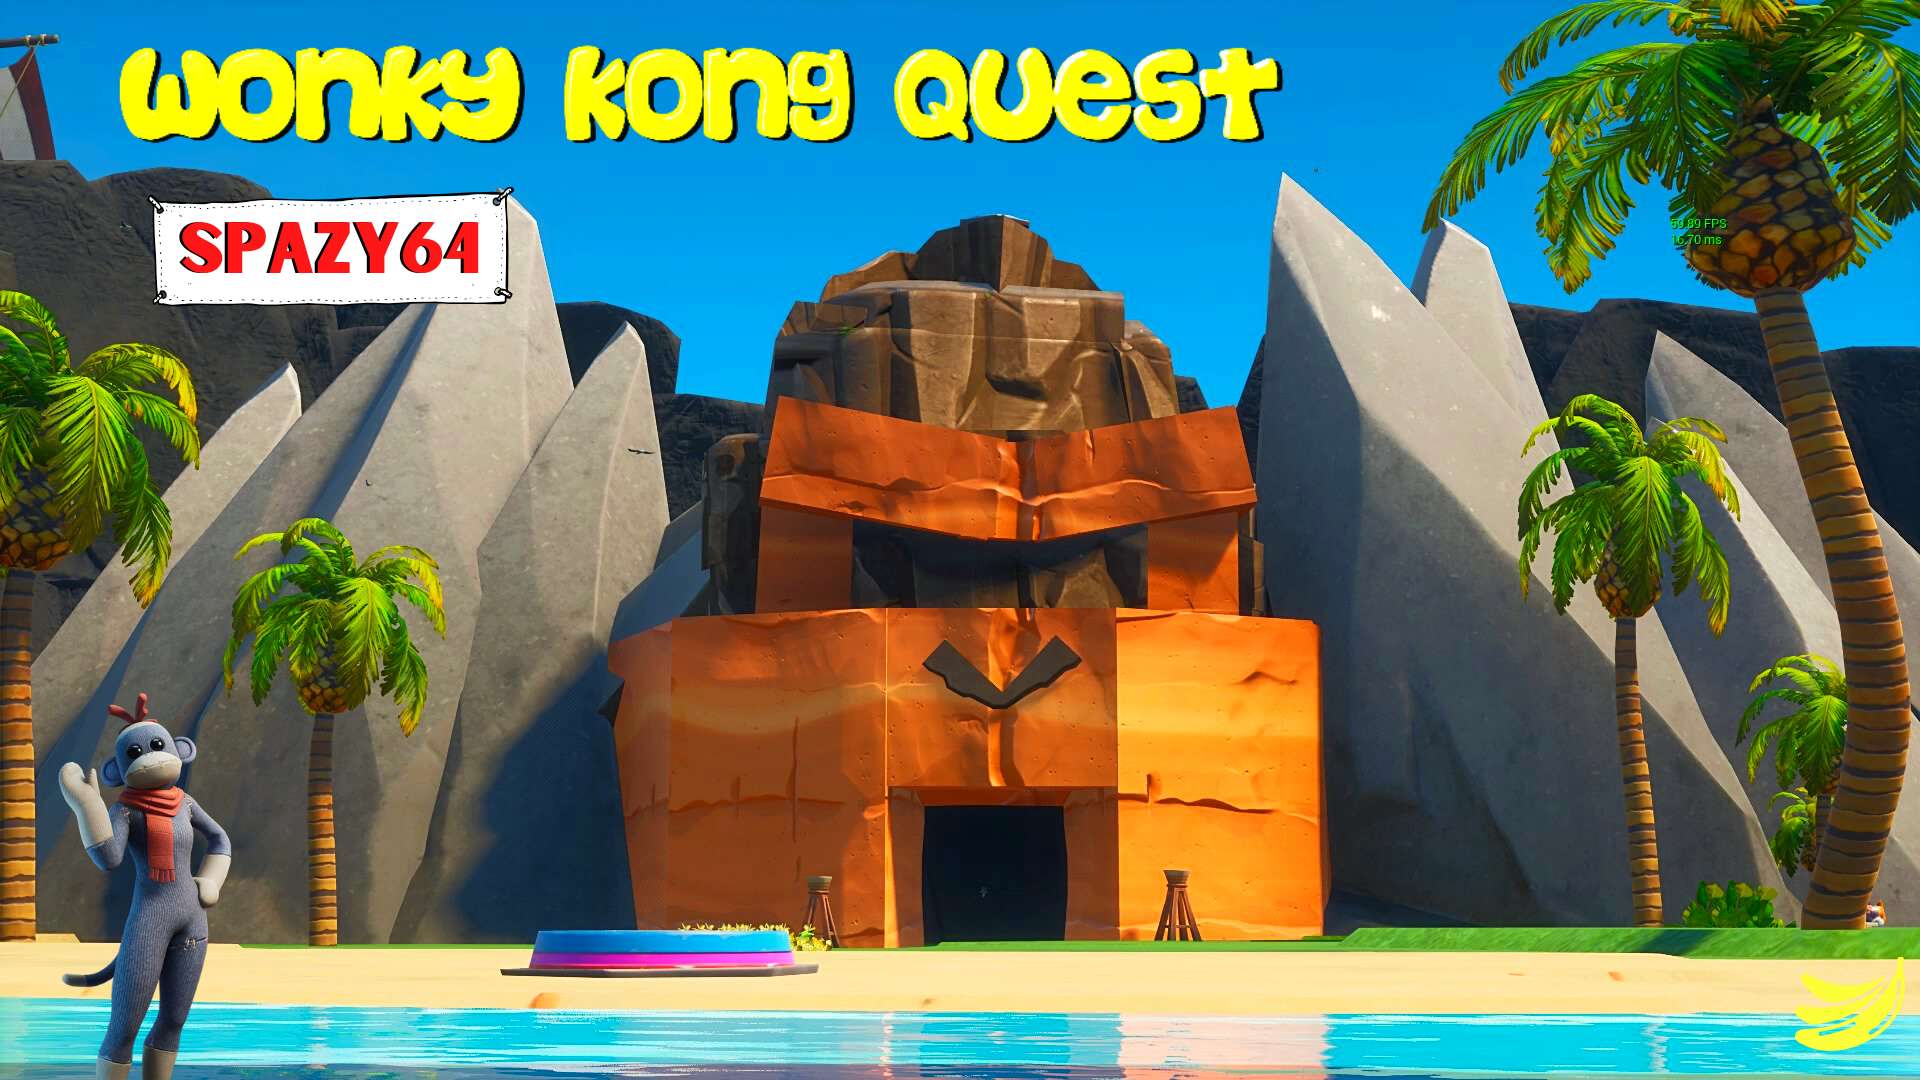 WONKY KONG QUEST